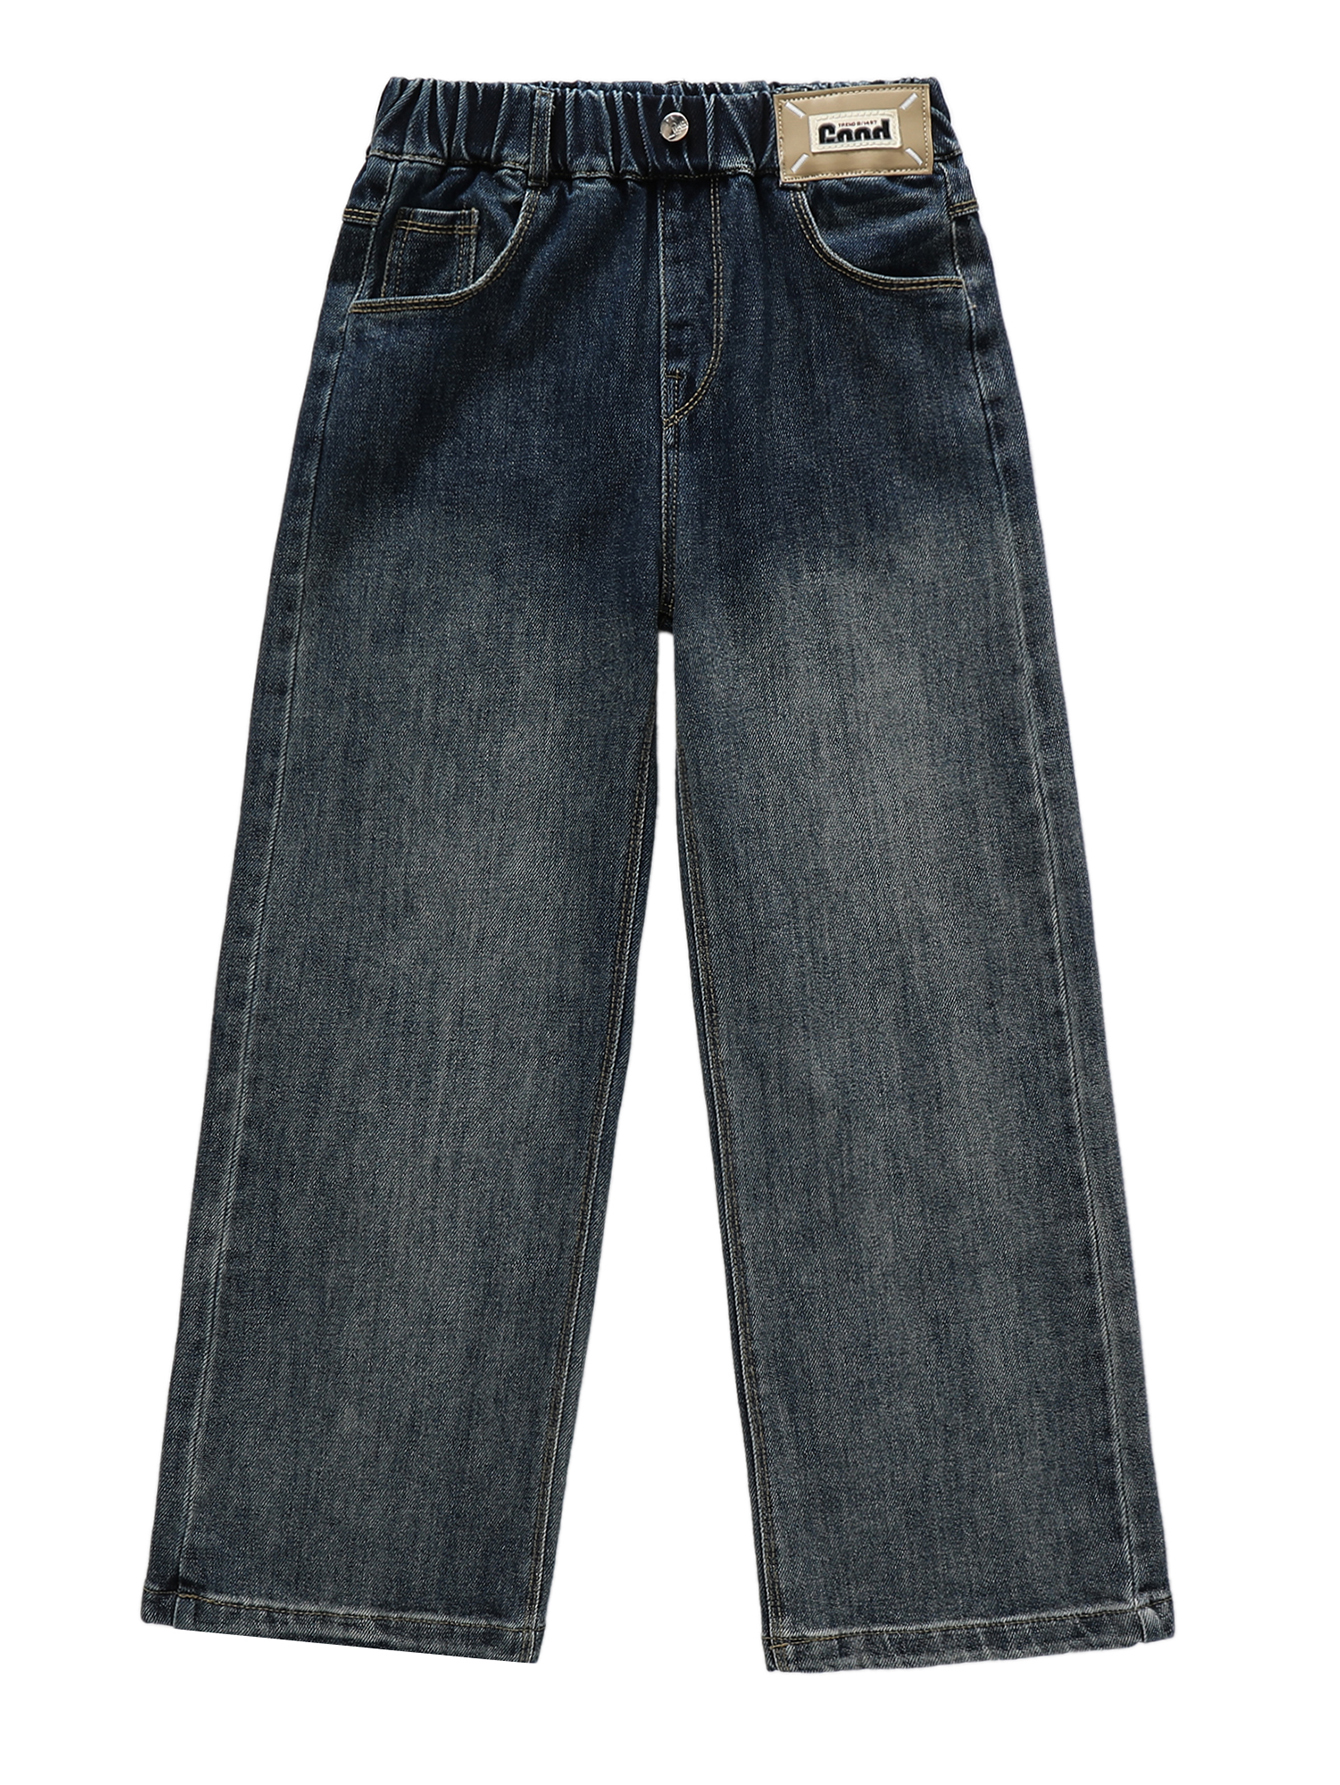 top quality reasonable price elastic waist kids jeans on clearance size 8 wholesale